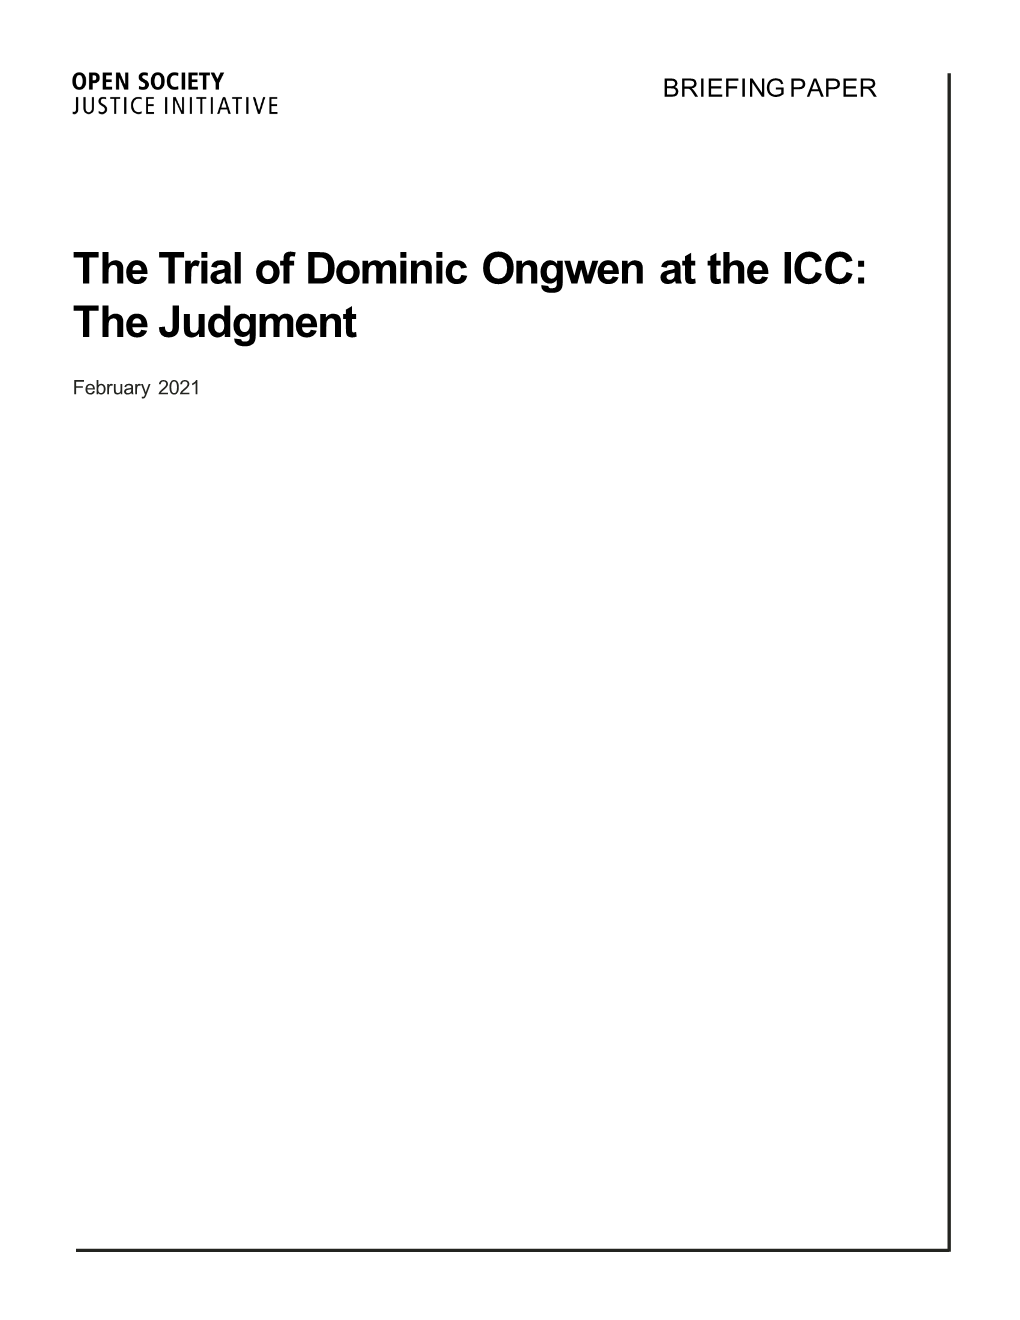 The Trial of Dominic Ongwen at the ICC: the Judgment